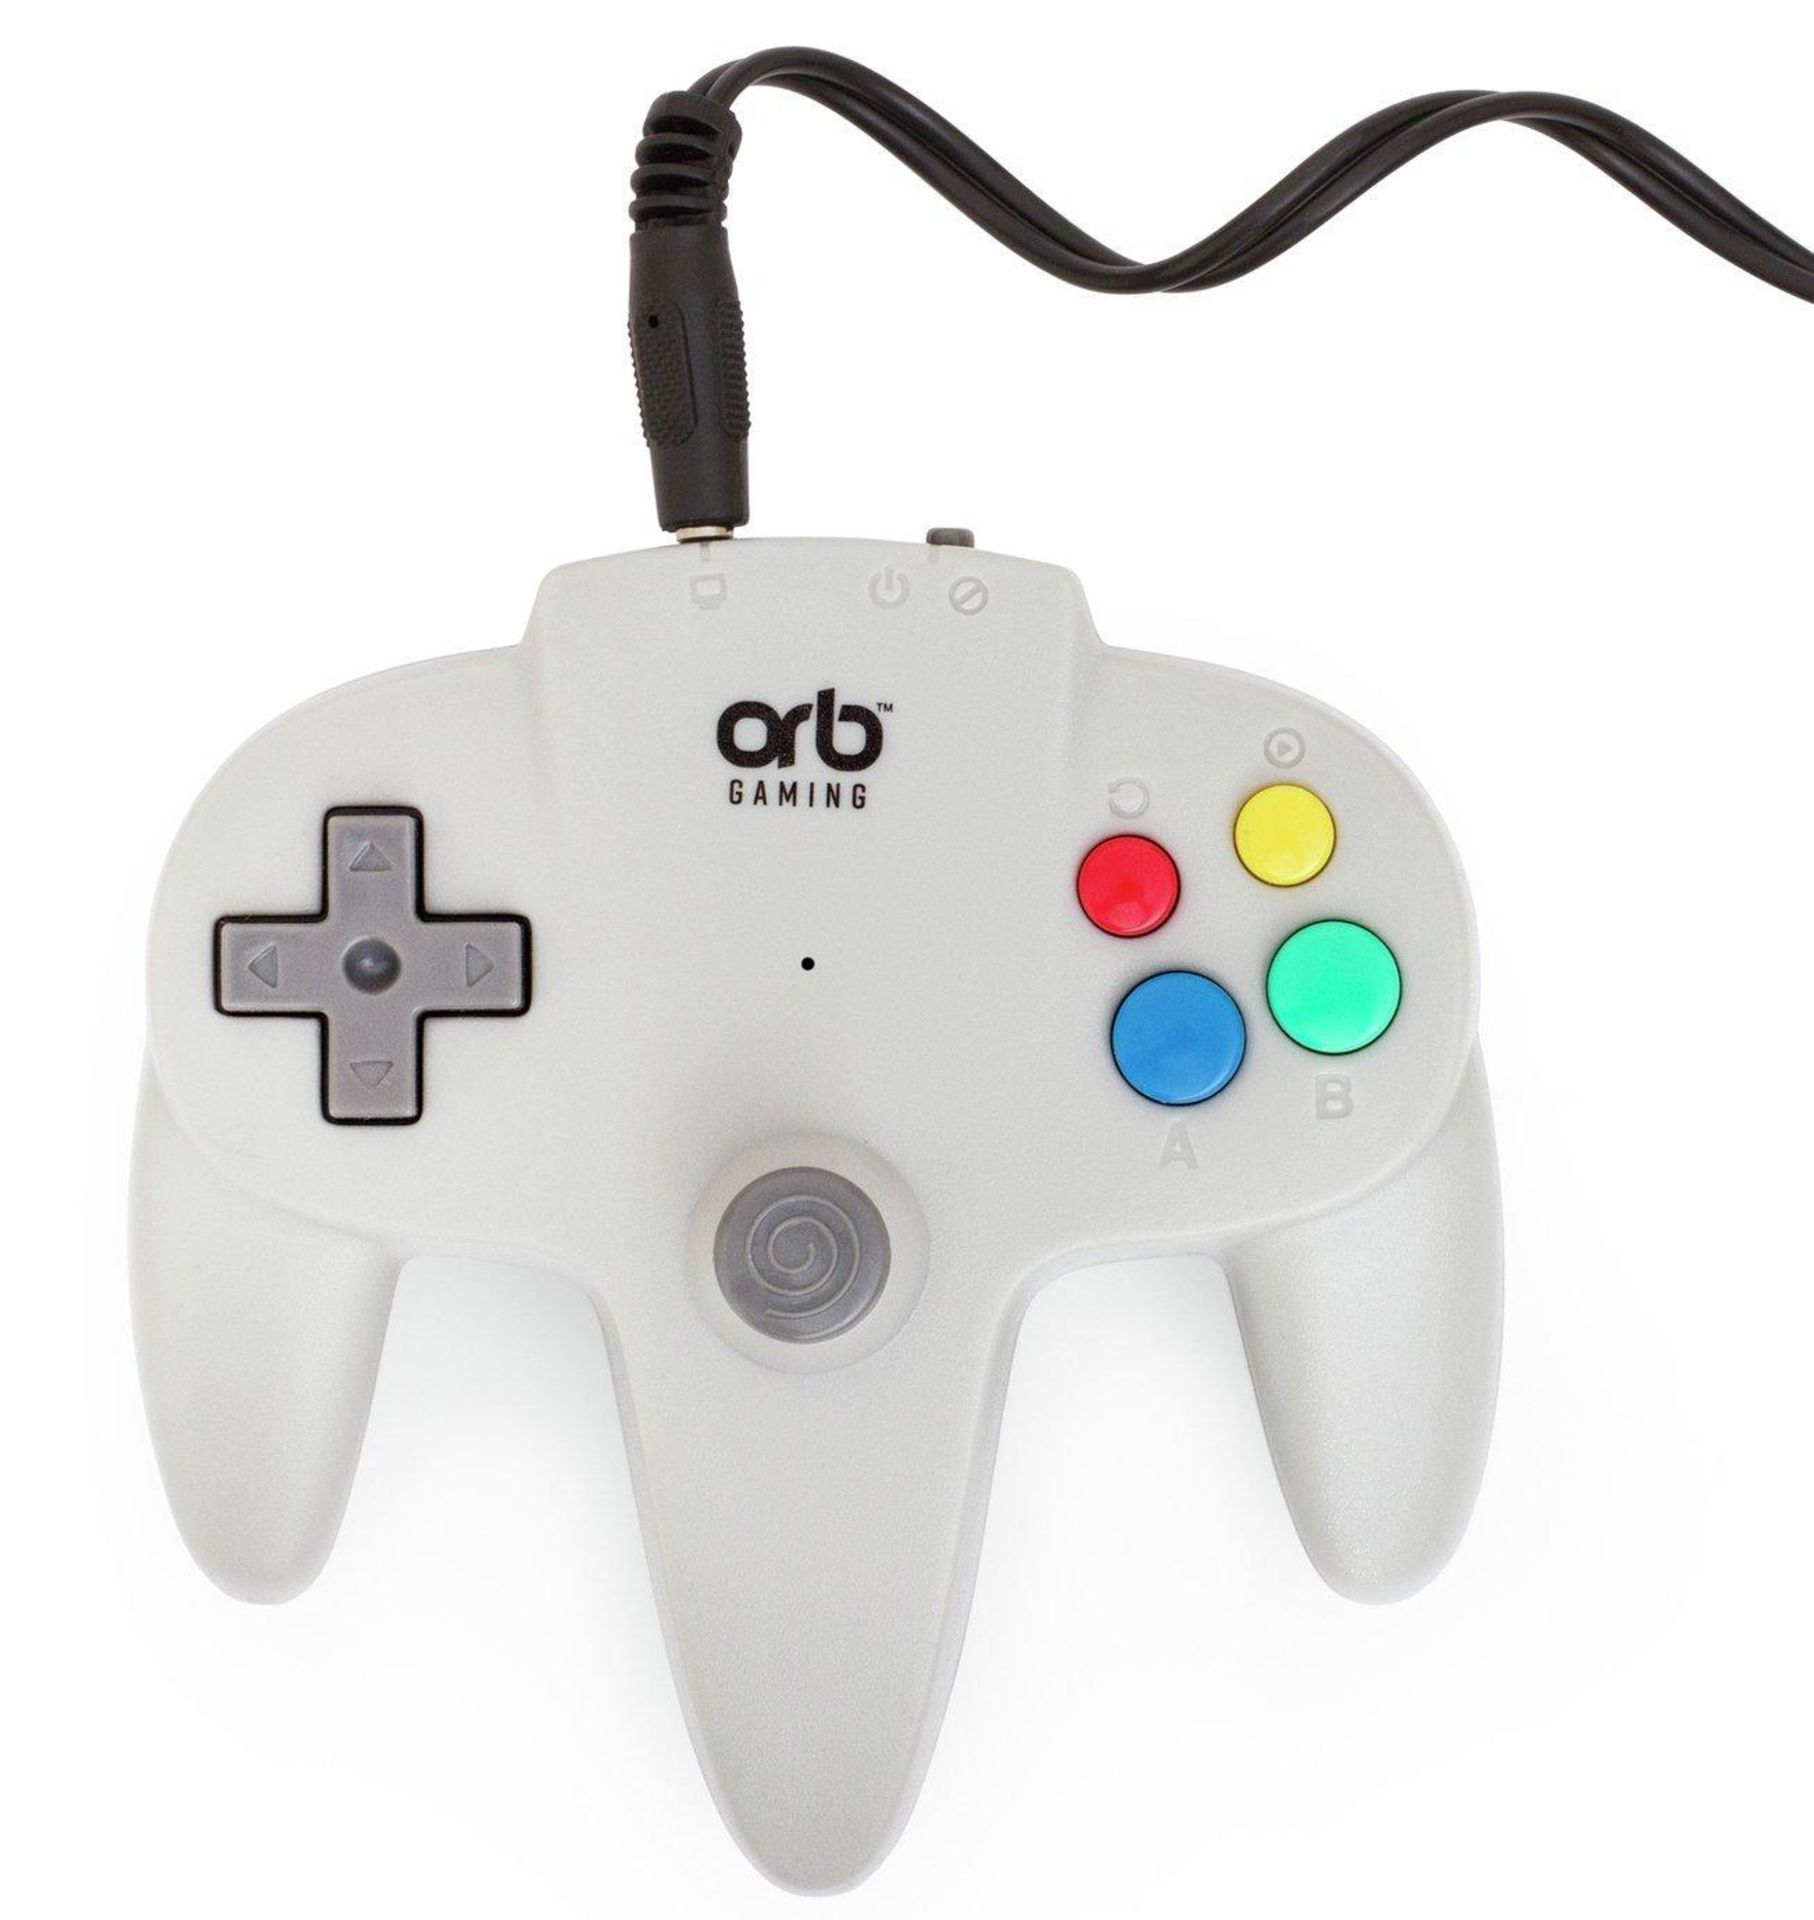 Retro Arcade Style Plug & Play Controller with 200 Games, £16.99 RRP